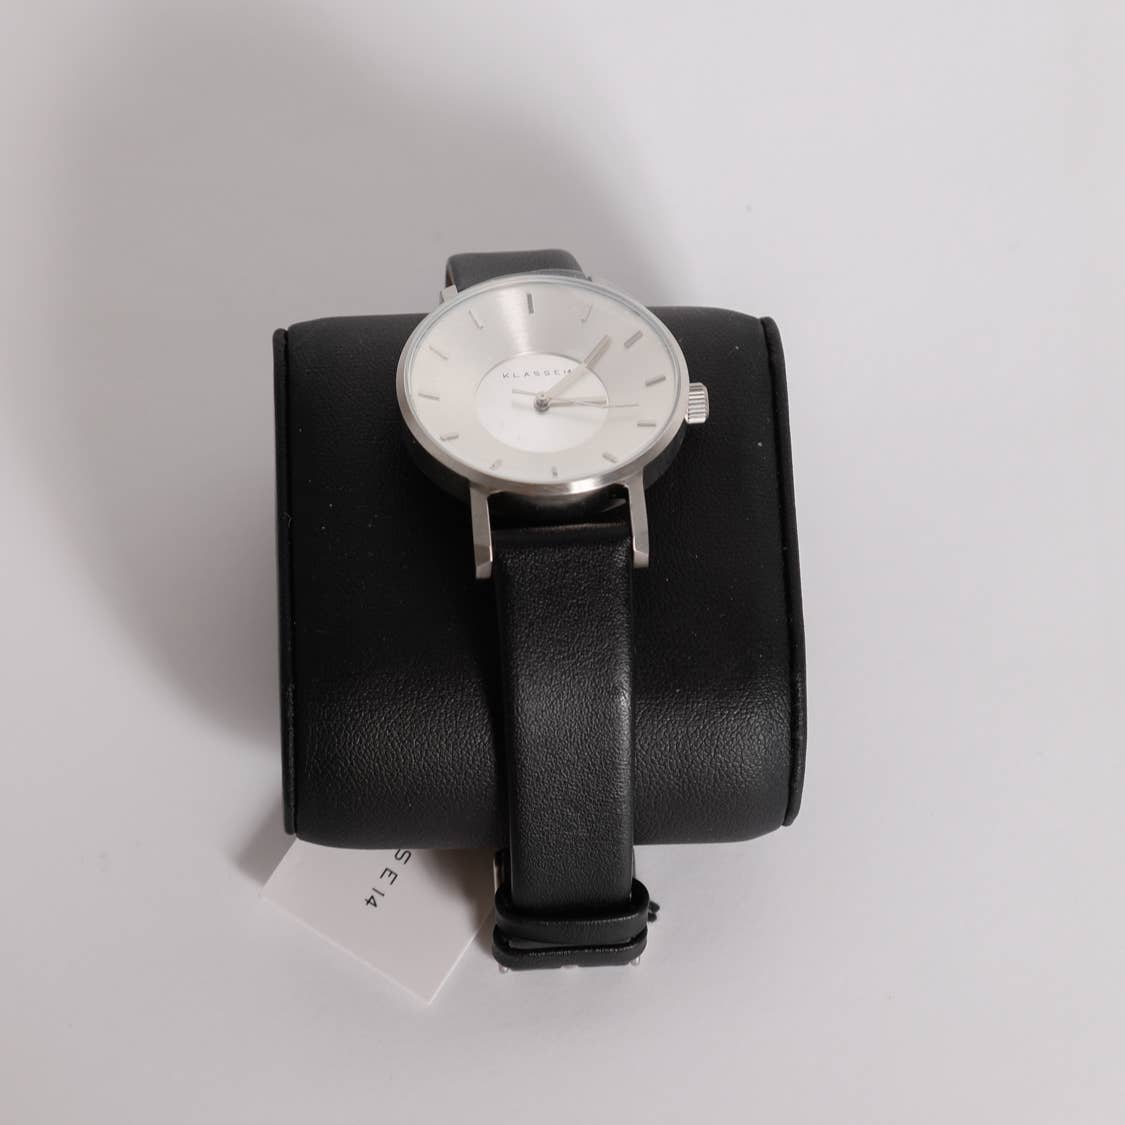 KLASSE 14 Stainless Steel Face with Black Leather Band Watch